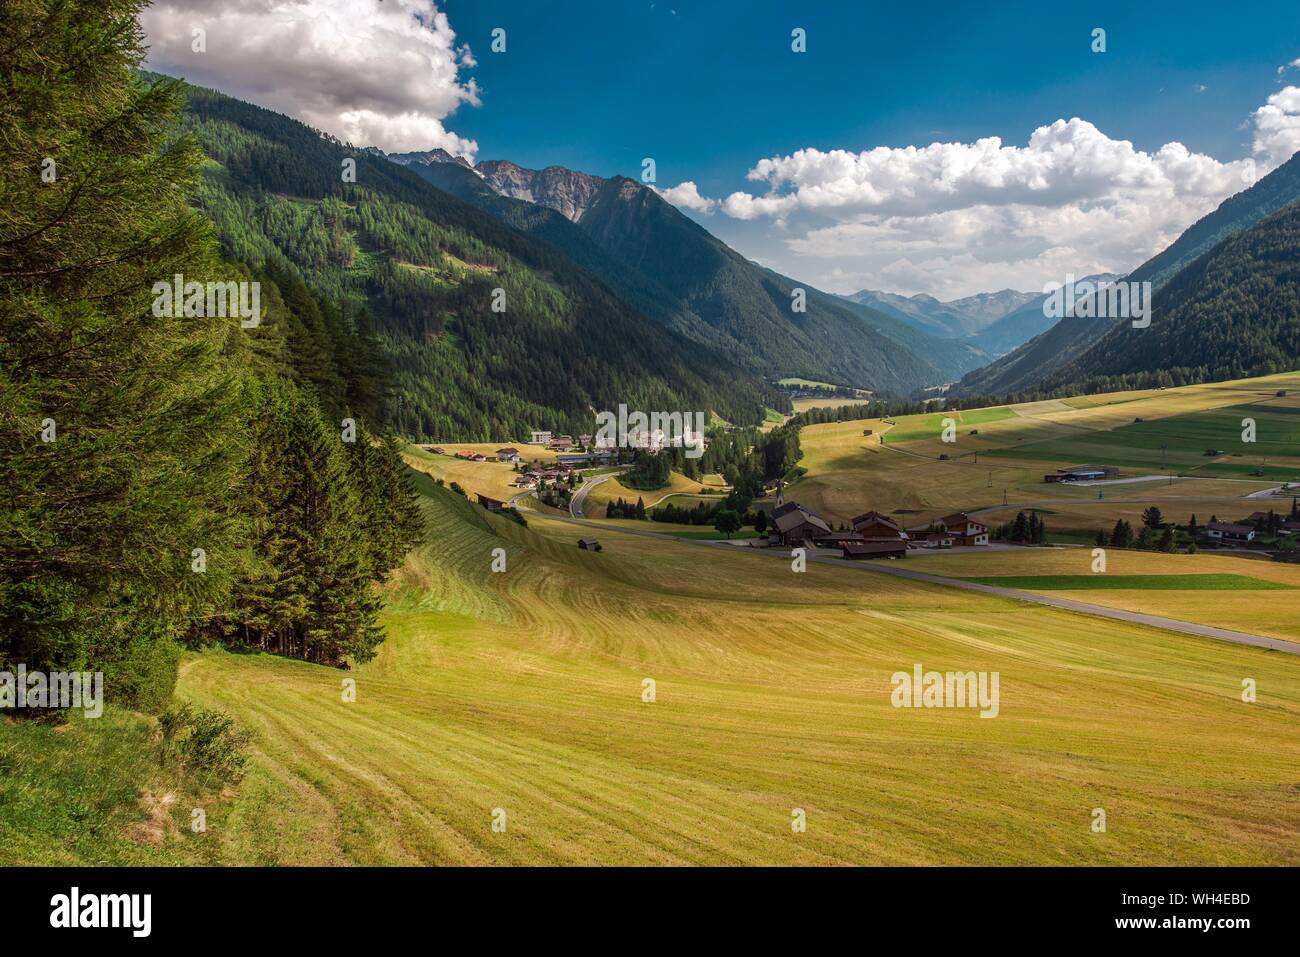 Scenic View Of Landscape Against Sky Stock Photo